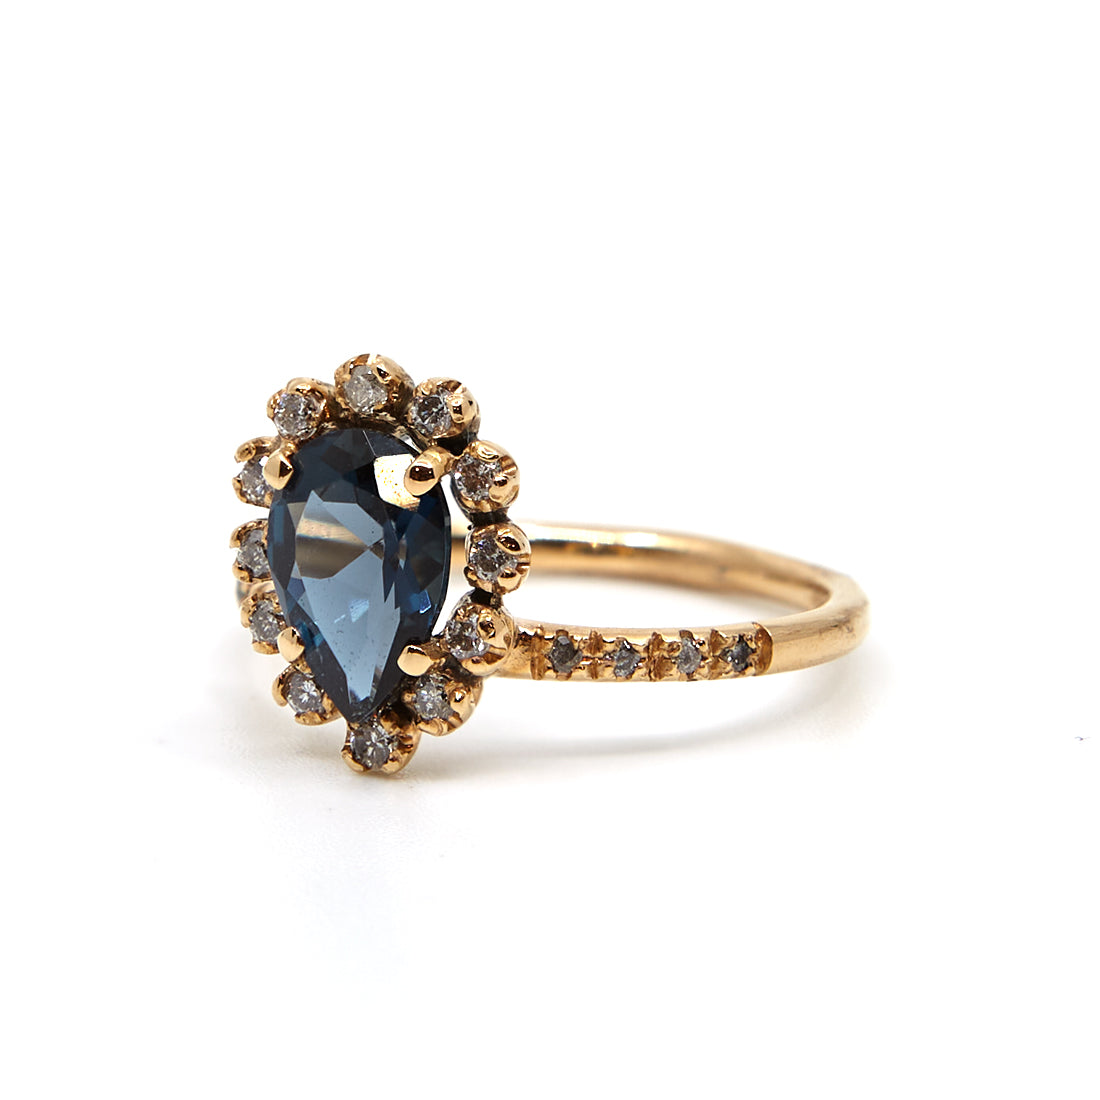 Rose gold ring with London blue topaz and gray diamond